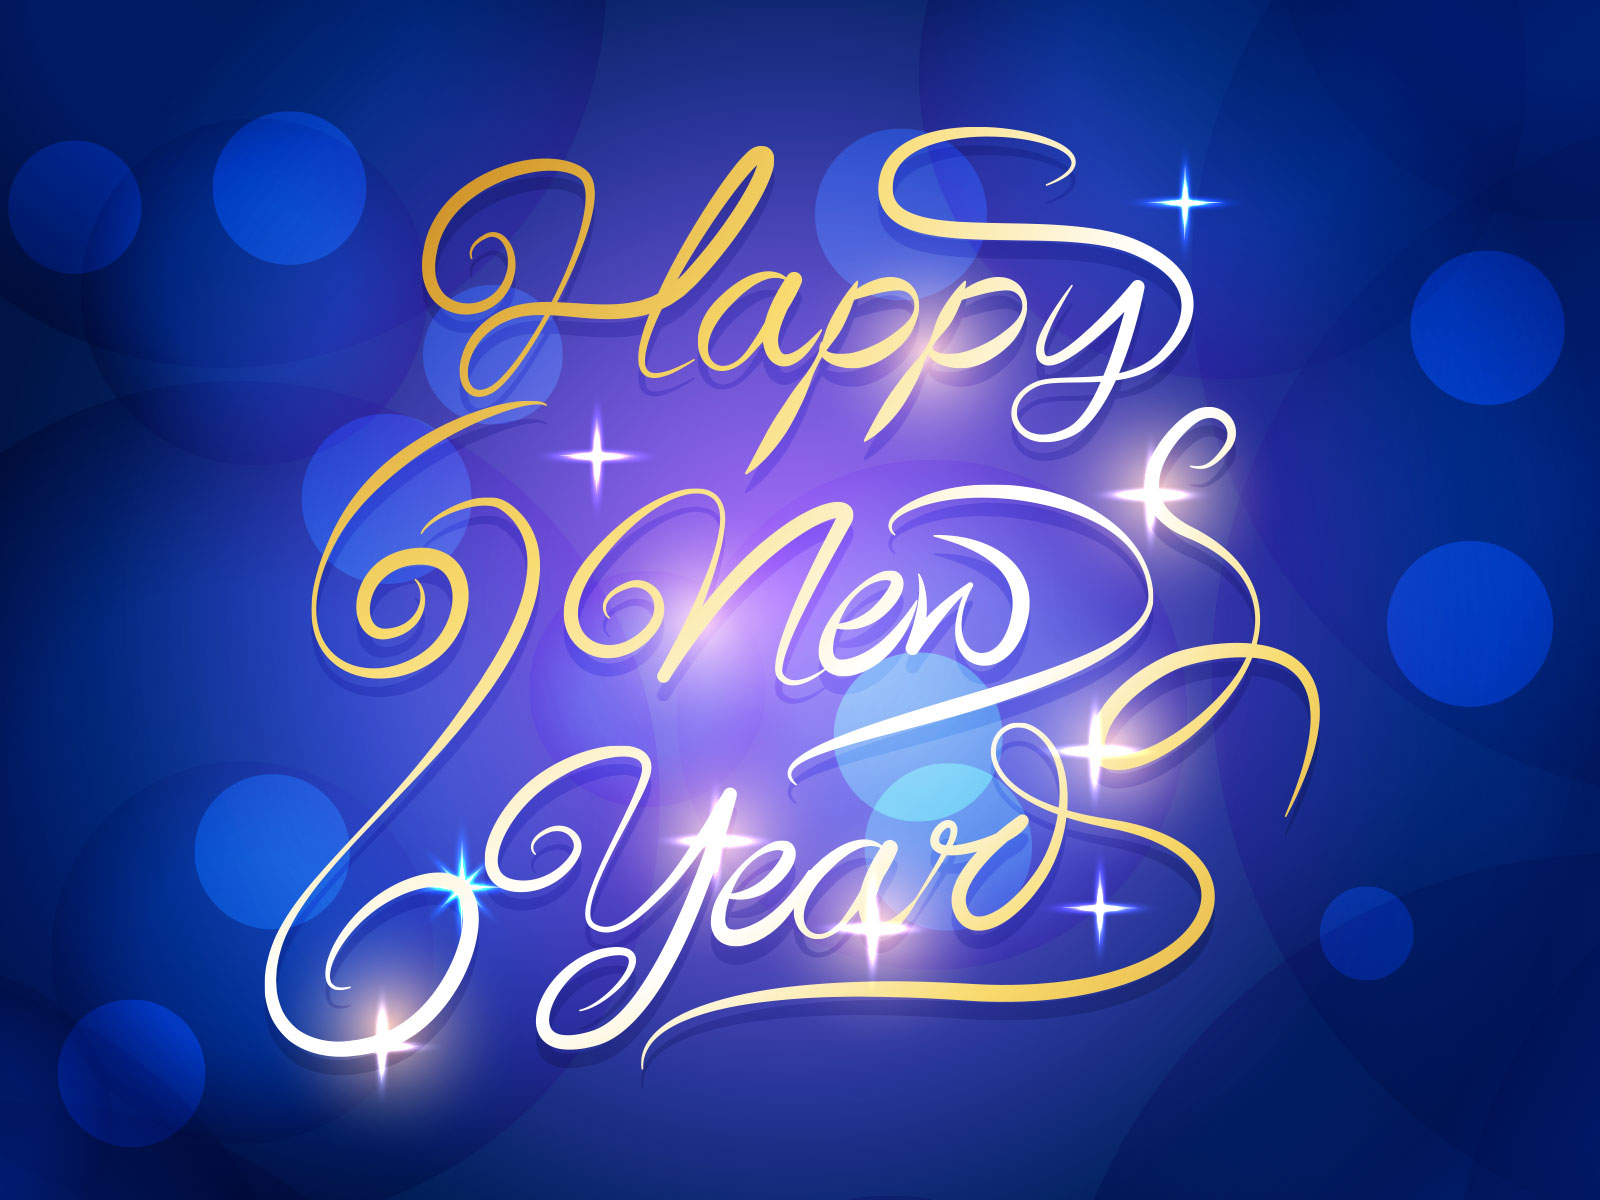 Happy New Year Wallpaper Image Amp Cover Photos